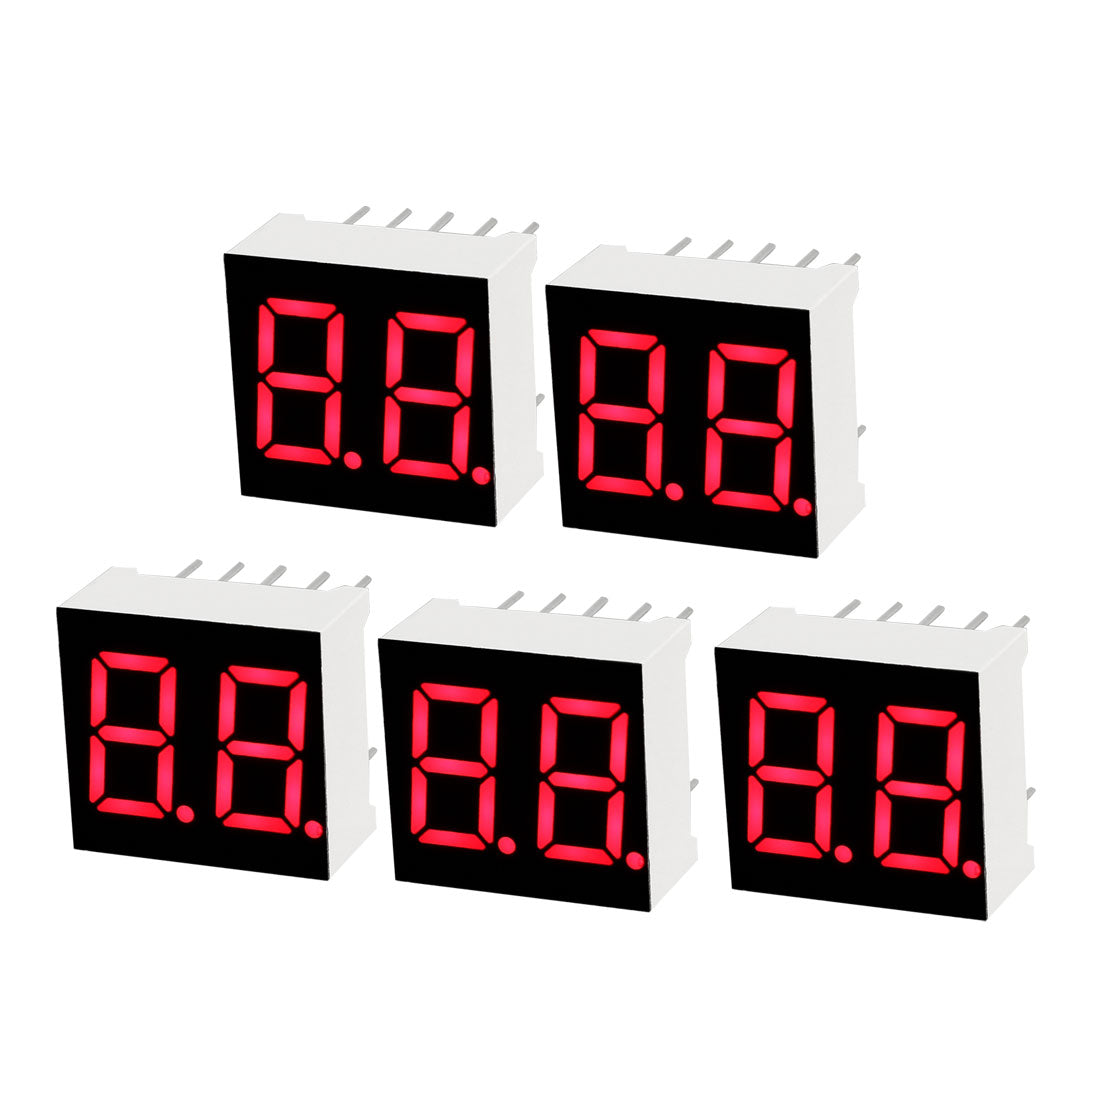 uxcell Uxcell Common Anode 10 Pin 2 Bit 7 Segment 0.59 x 0.55 x 0.28 Inch 0.35" Red LED Display Digital Tube 5pcs